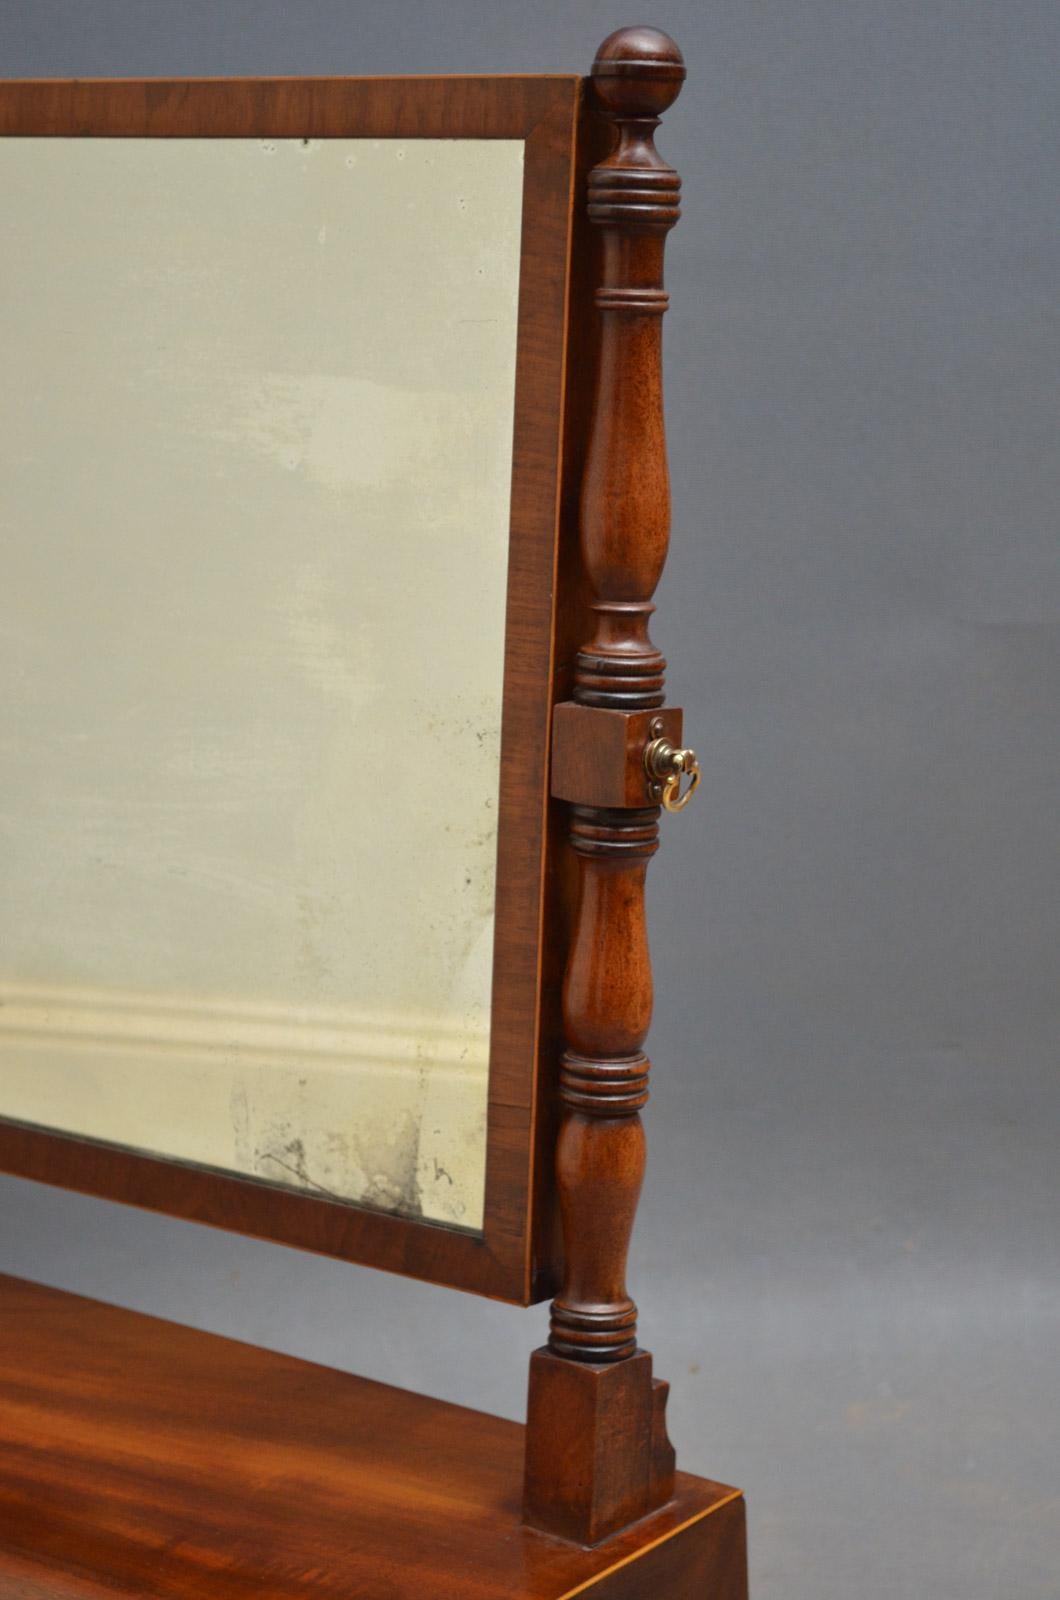 Sn3284 attractive regency, mahogany toilet mirror, having original plate in turned baluster uprights, inverted breakfront plinth base with three Greek key inlaid drawers, all standing on bun feet, circa 1810
Measures: H25